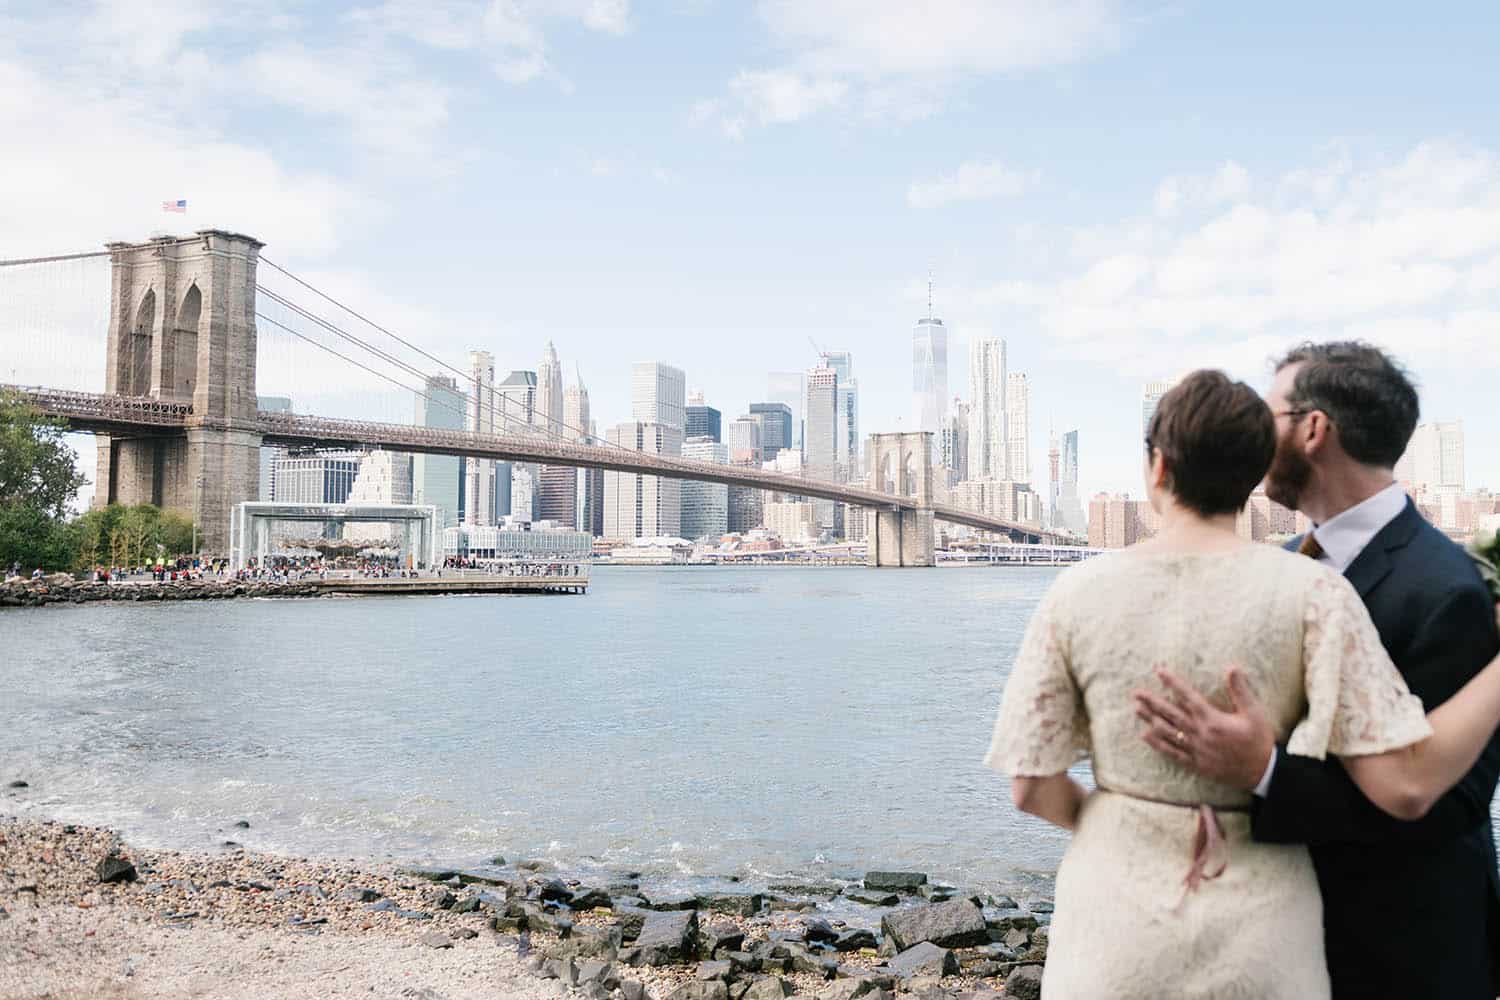 Brooklyn Bridge Park: one of the best places in New York to propose